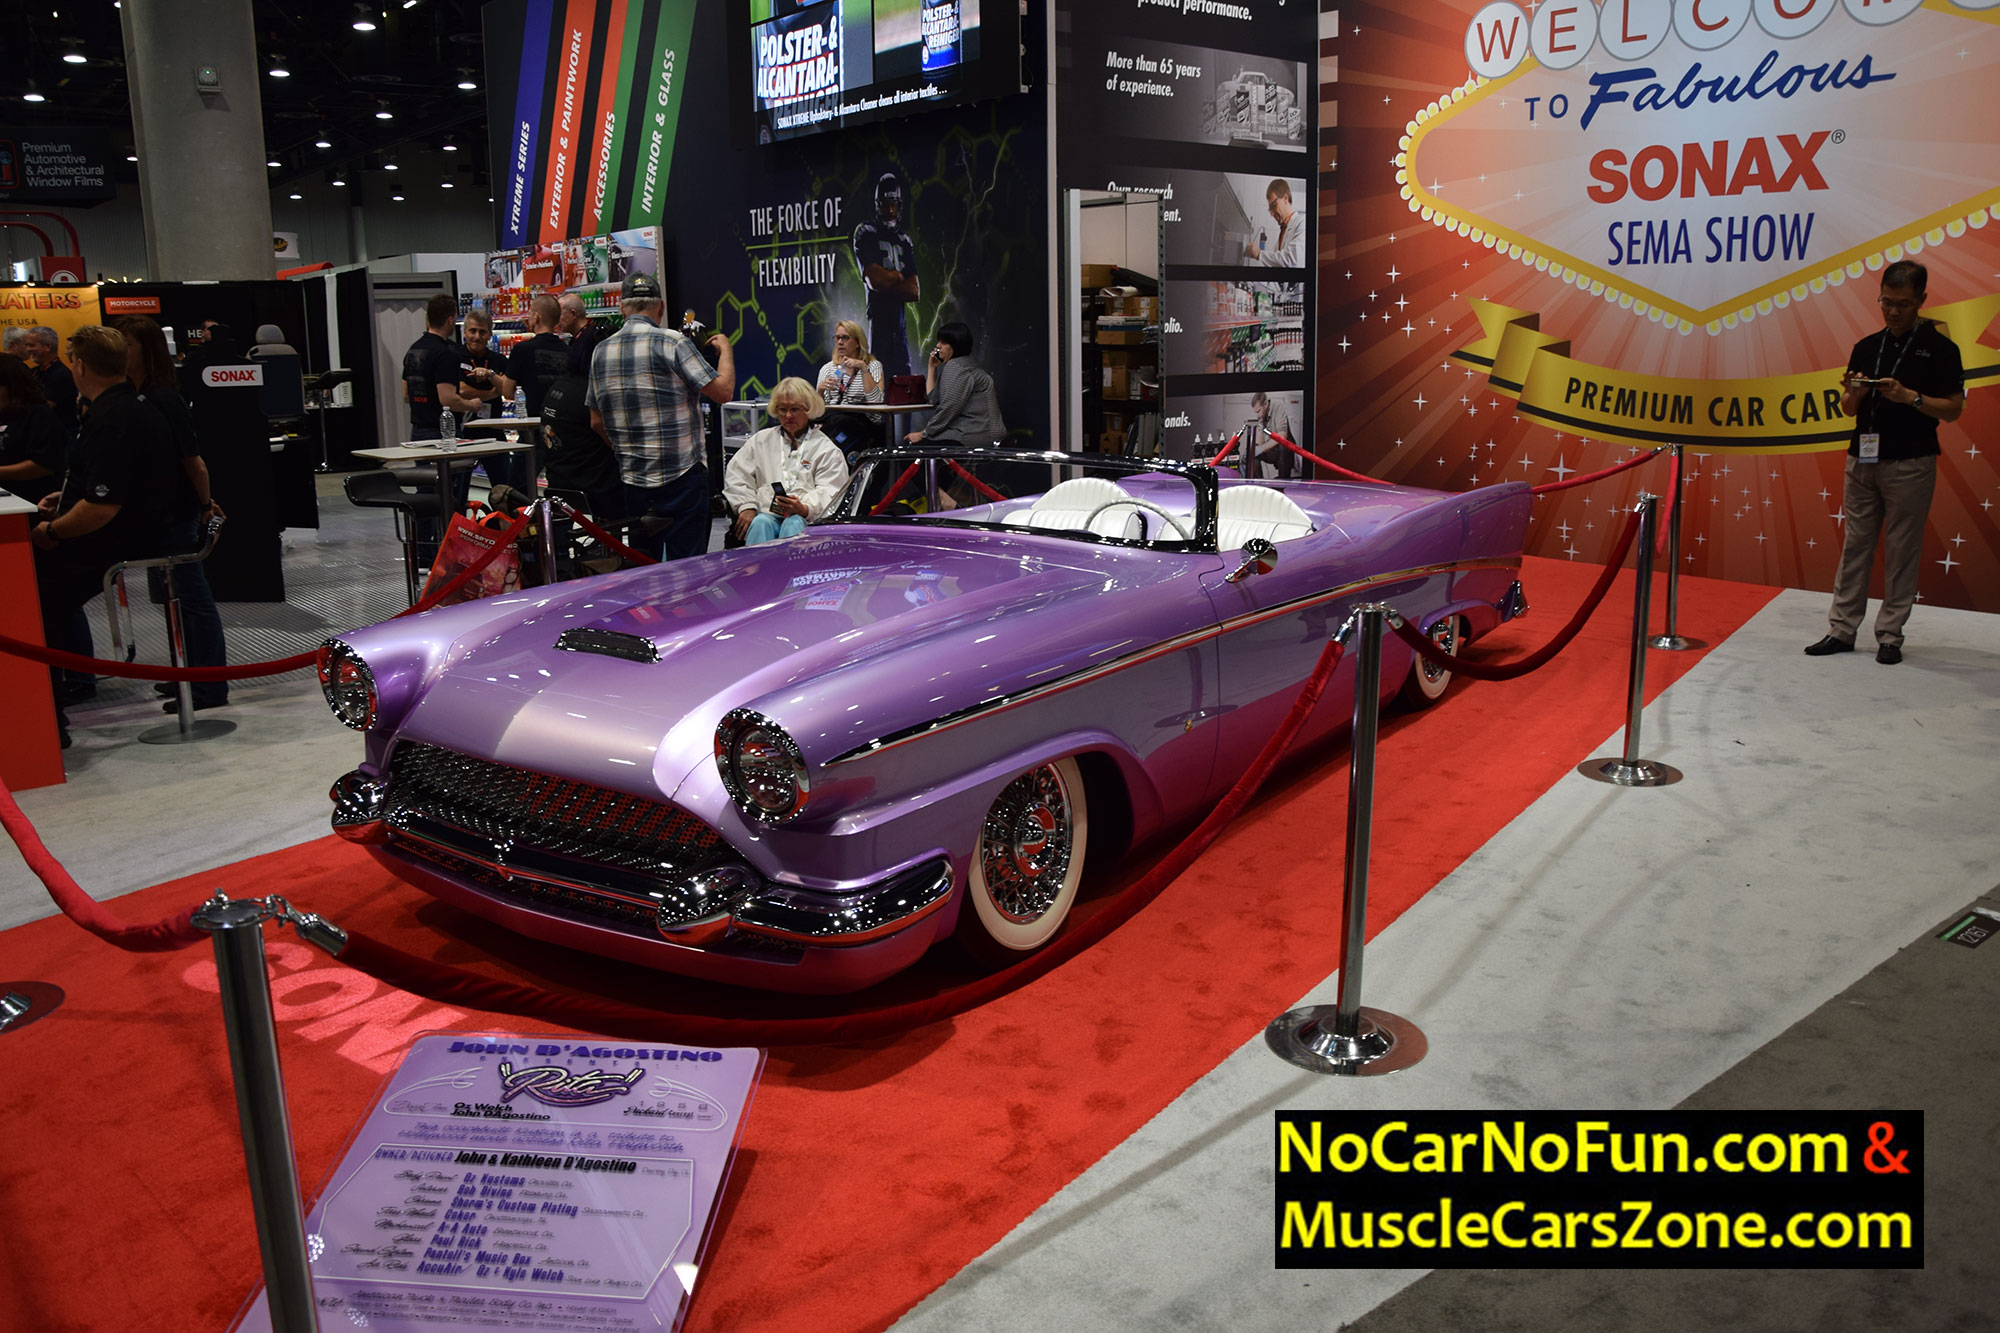 1958 Packard two-seater sportster RITA by John D Agostino - 2016 SEMA SHOW